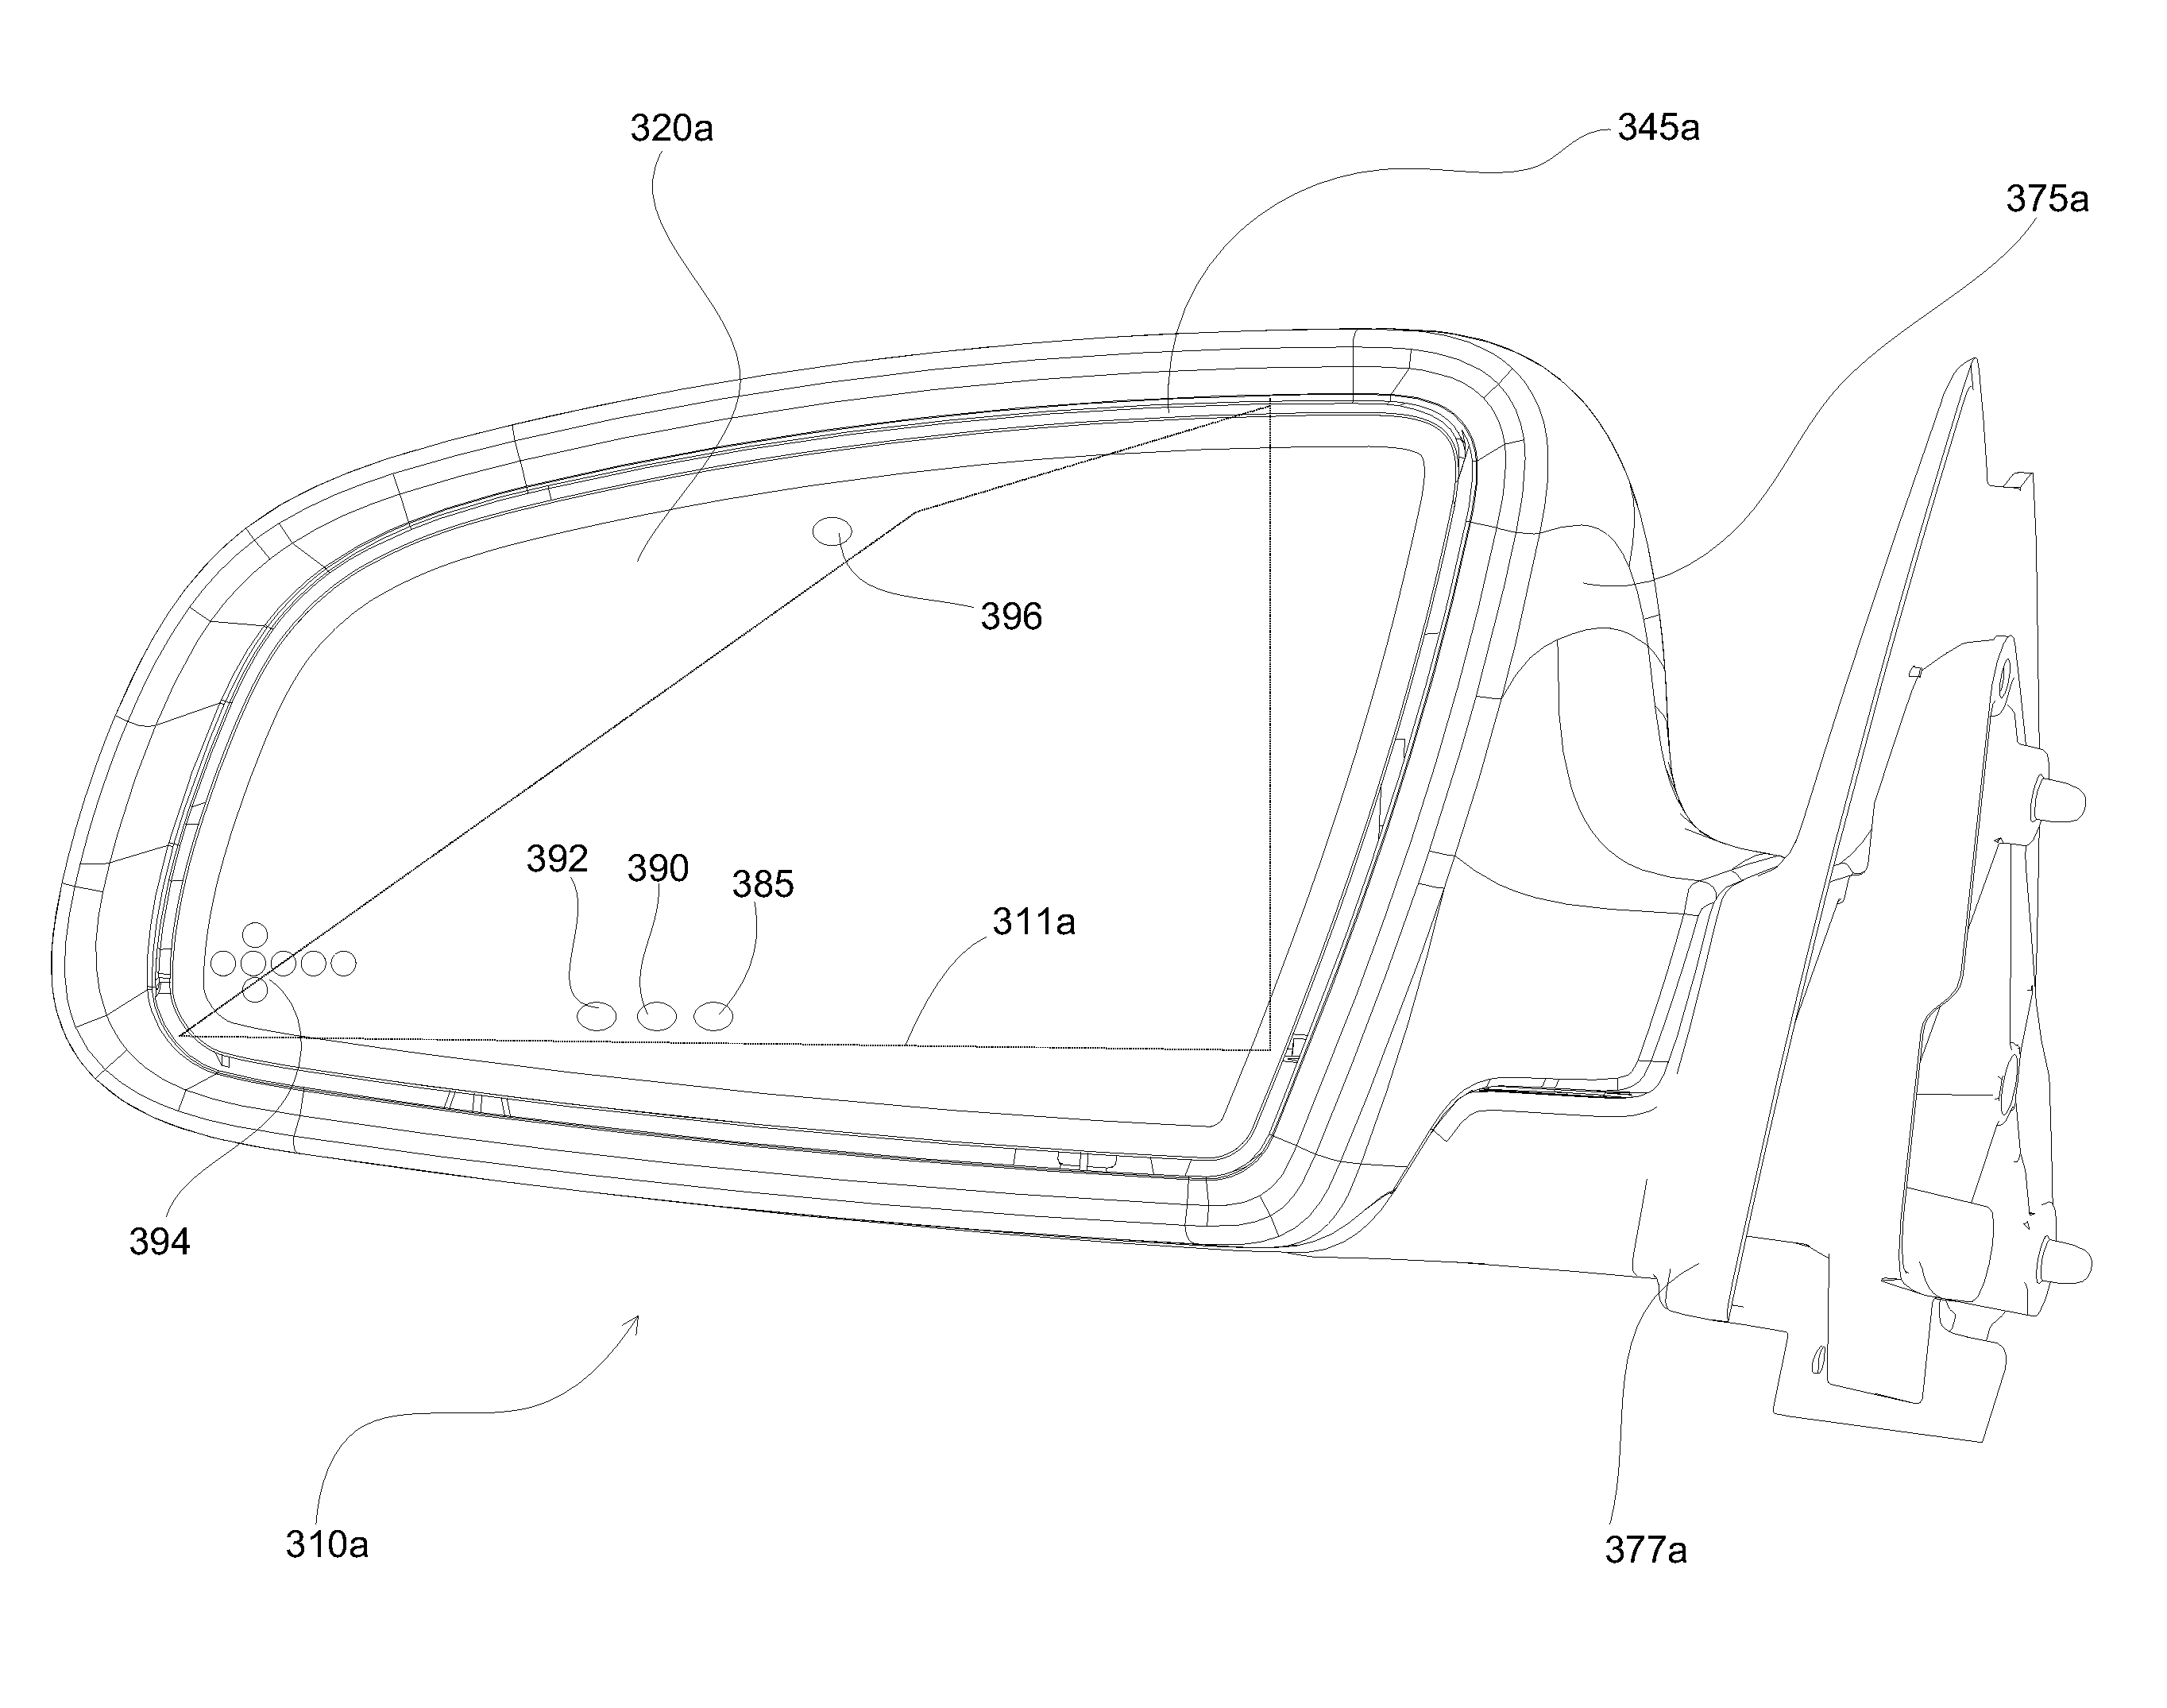 Vehicular Rearview Mirror Elements and Assemblies Incorporating These Elements